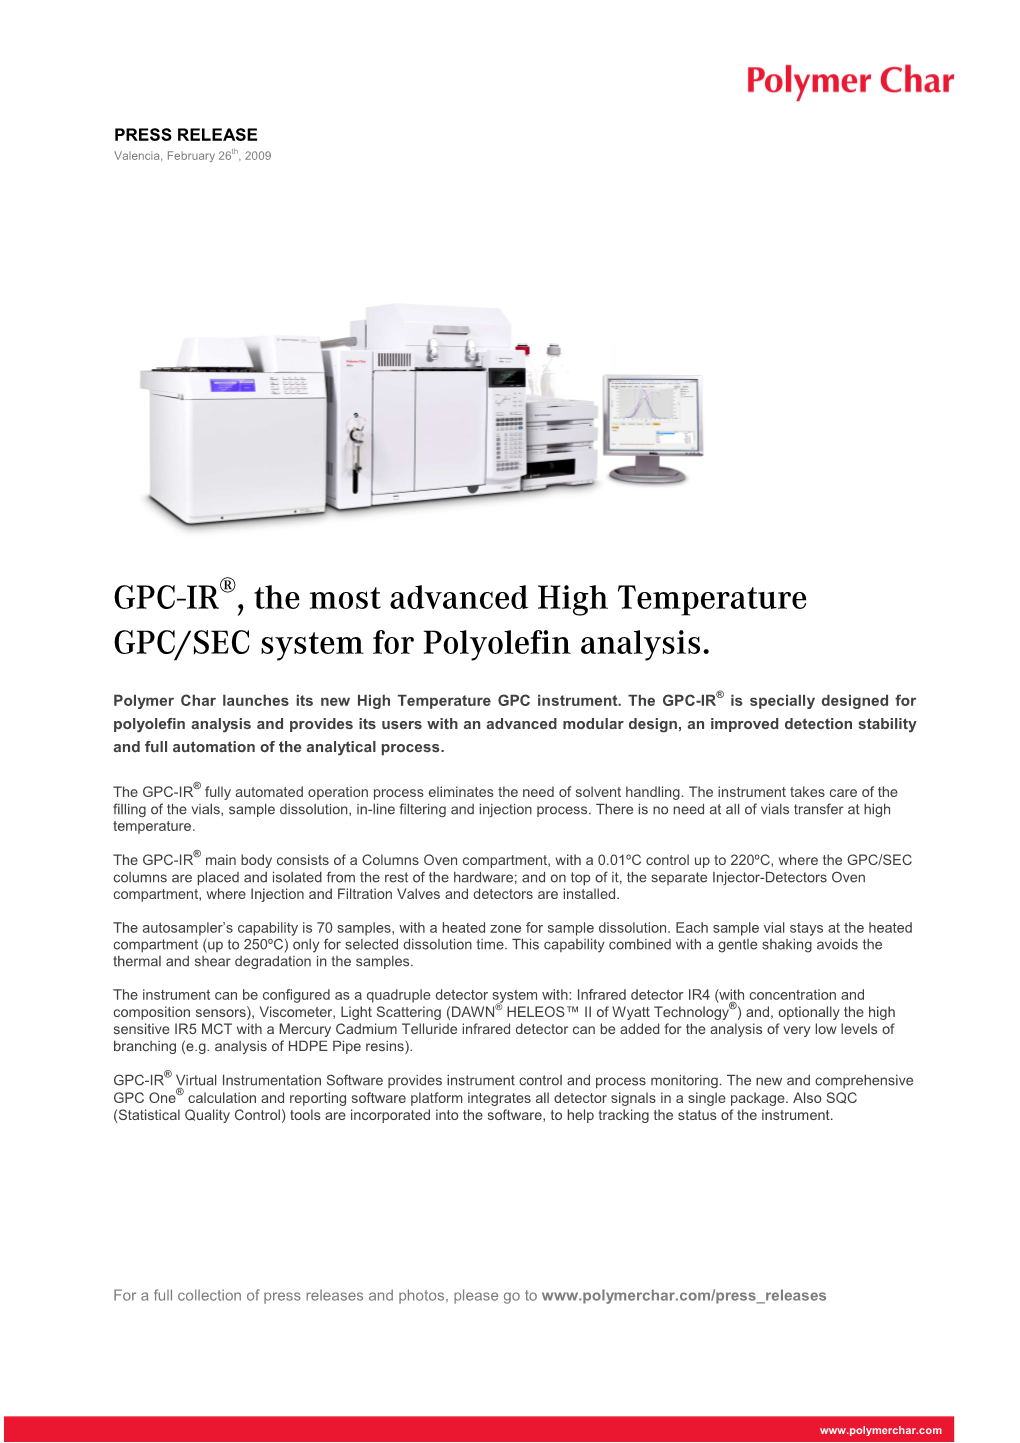 GPC-IR , the Most Advanced High Temperature GPC/SEC System For